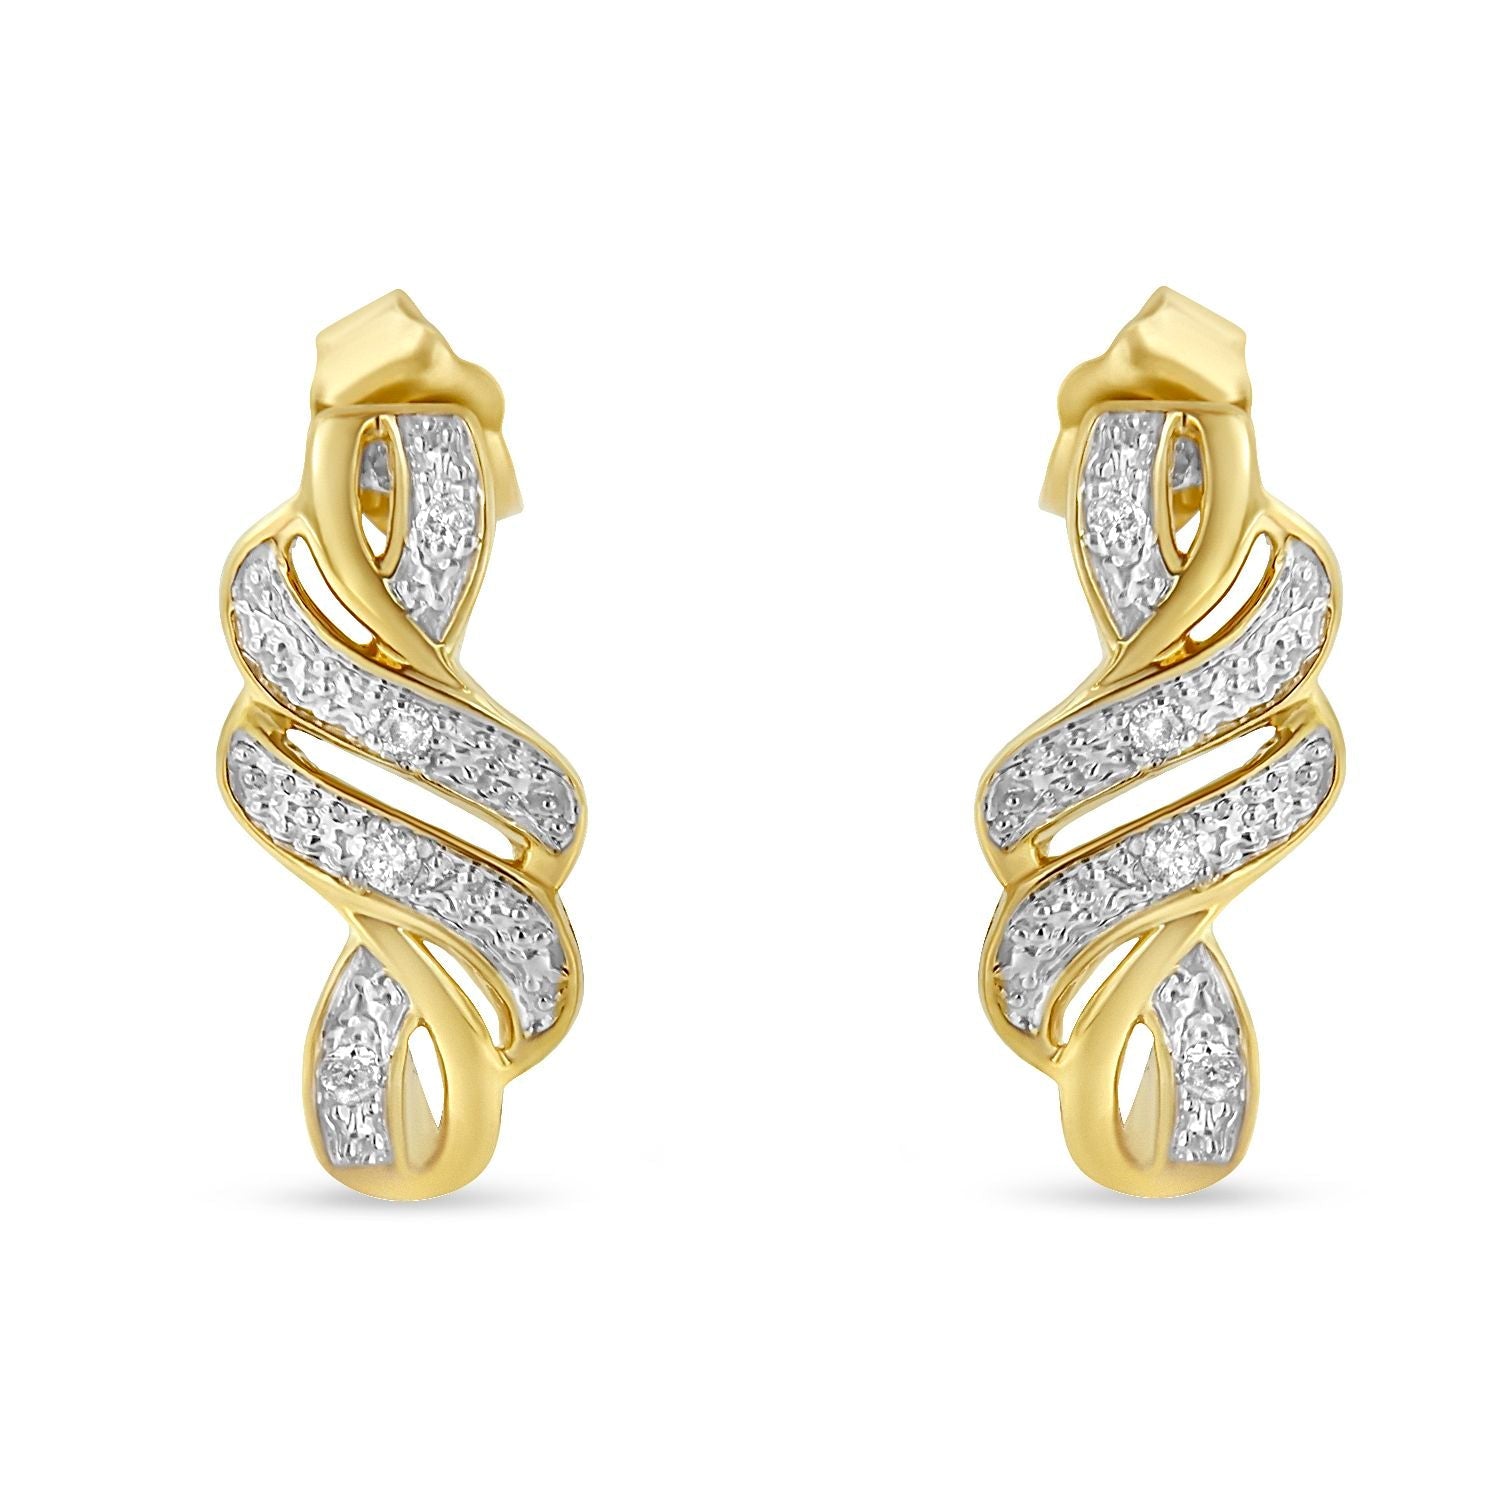 Yellow Plated Sterling Silver Round Cut Diamond Swirl Earrings (0.08 cttw, H-I Color, I2-I3 Clarity) - LinkagejewelrydesignLinkagejewelrydesign